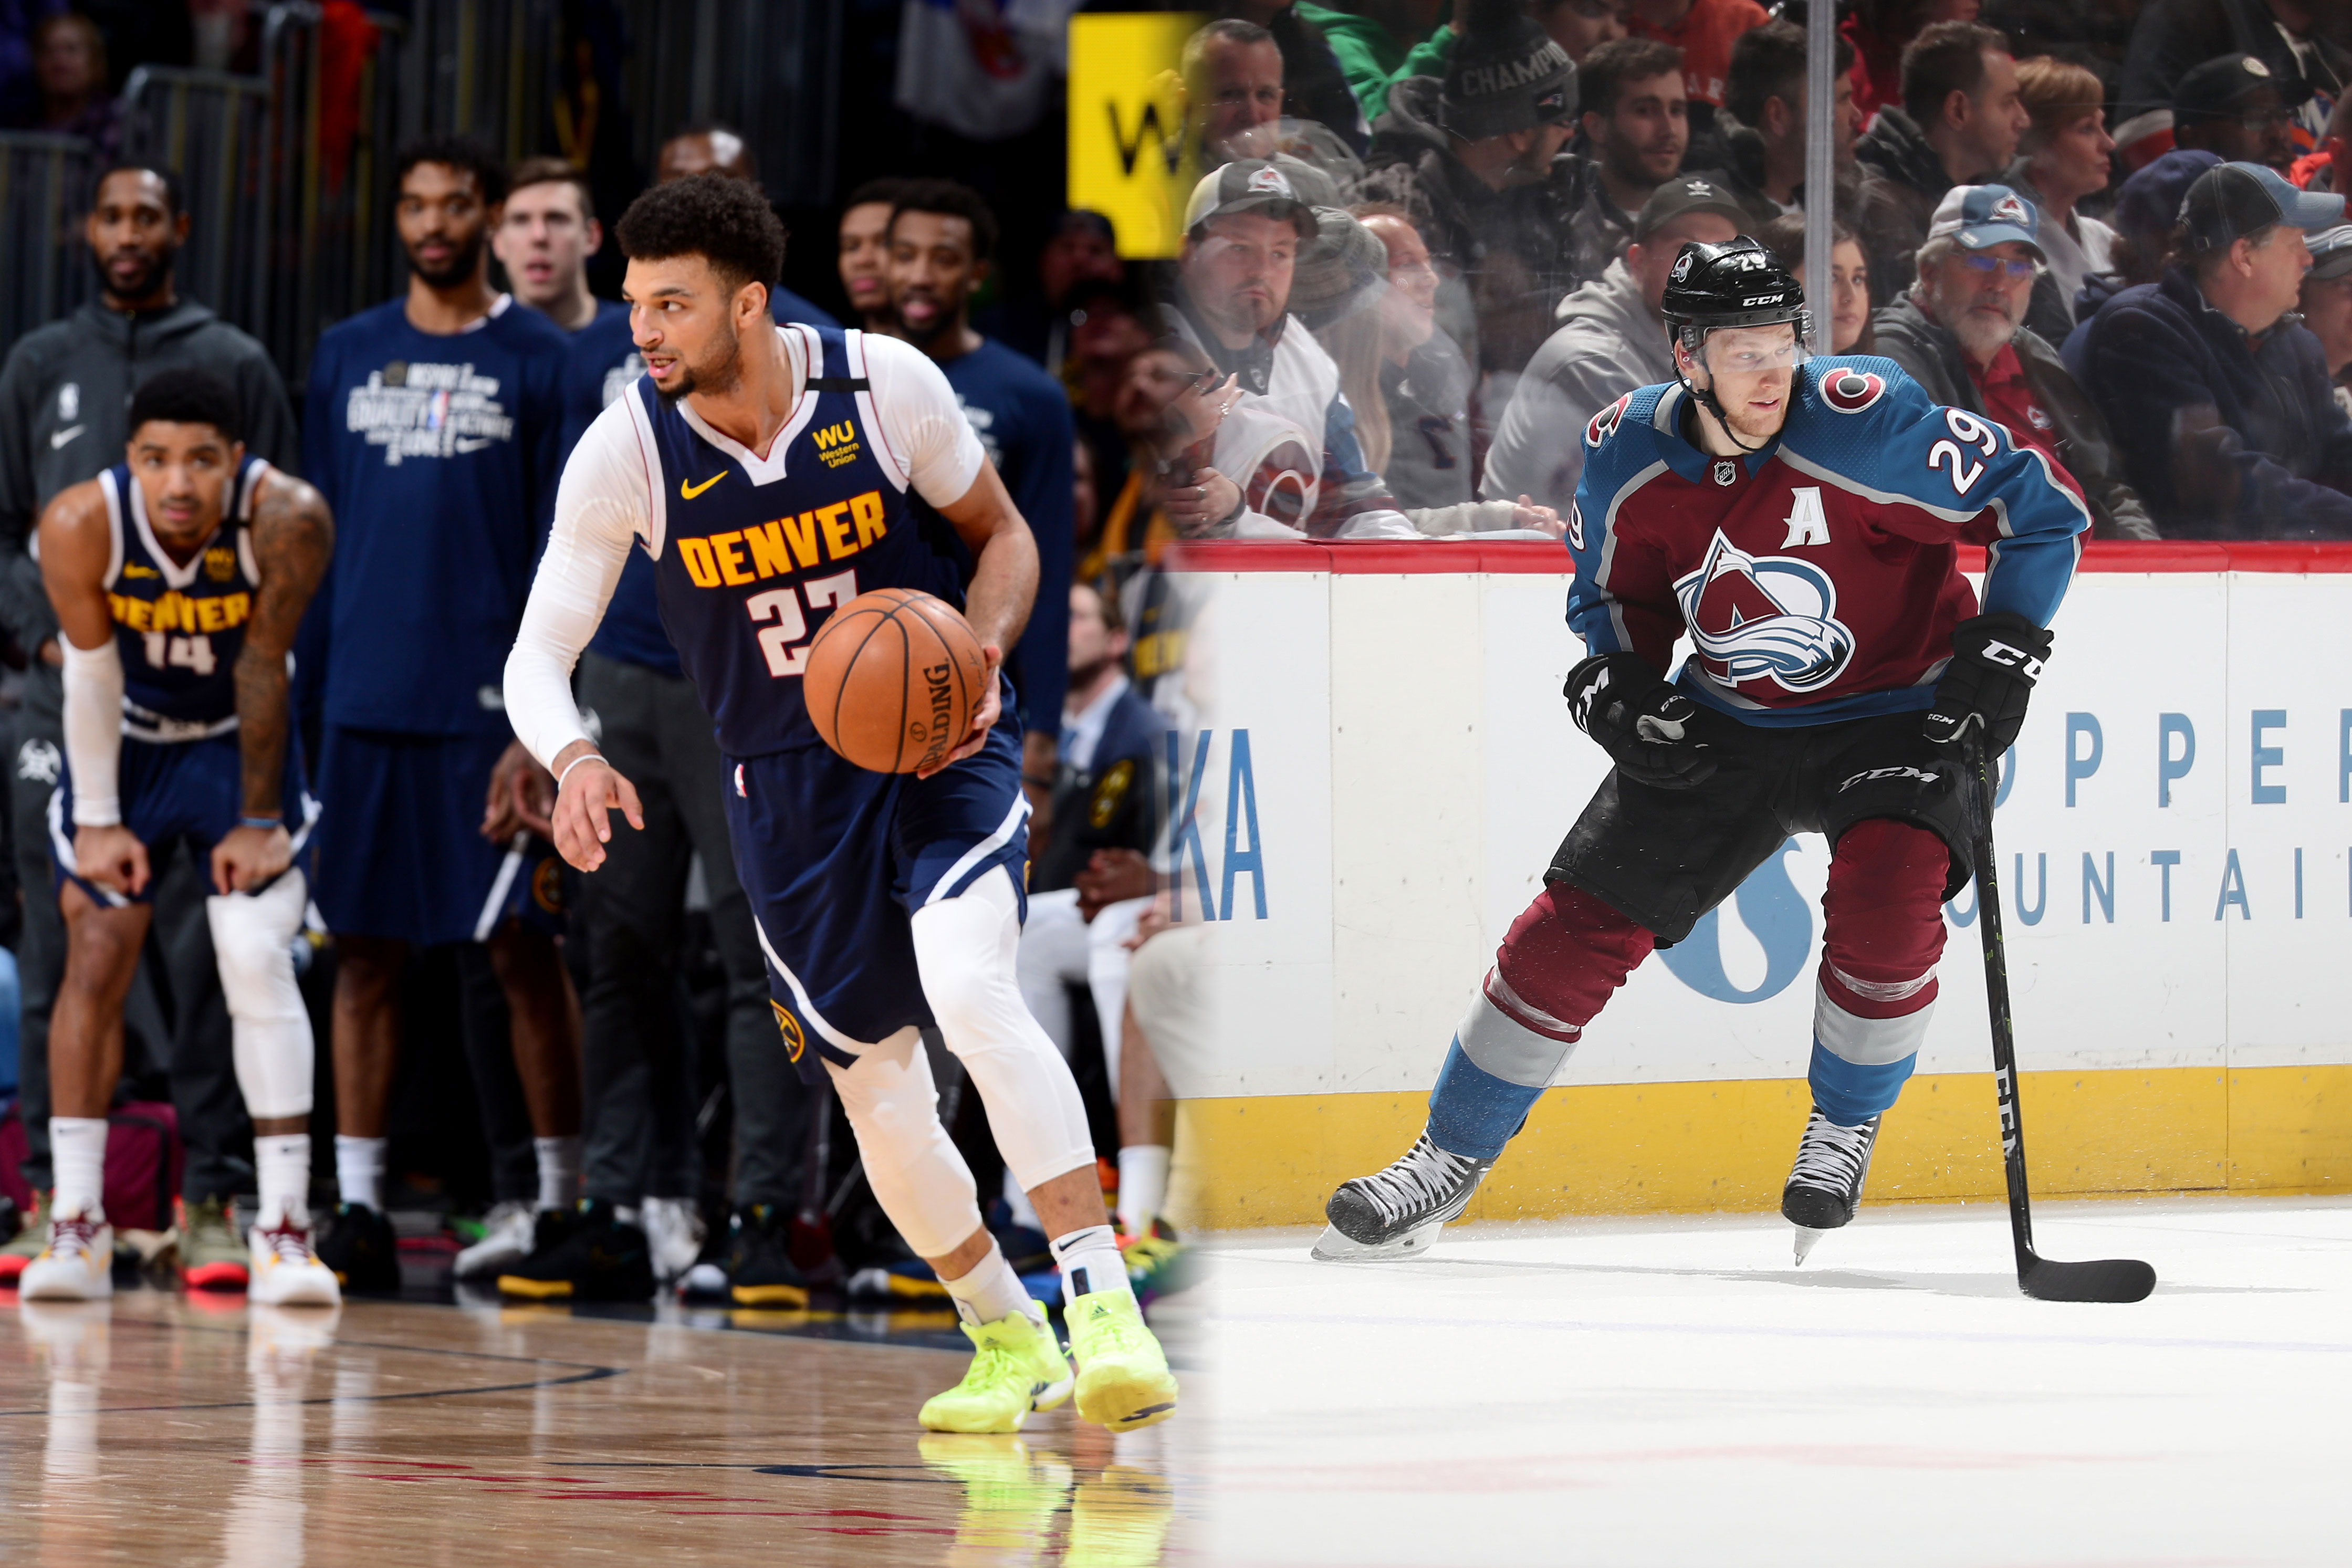 ALTITUDE TV TO BROADCAST A NUGGETS AND AN AVALANCHE GAME LOCALLY ON KTVD CHANNEL 20